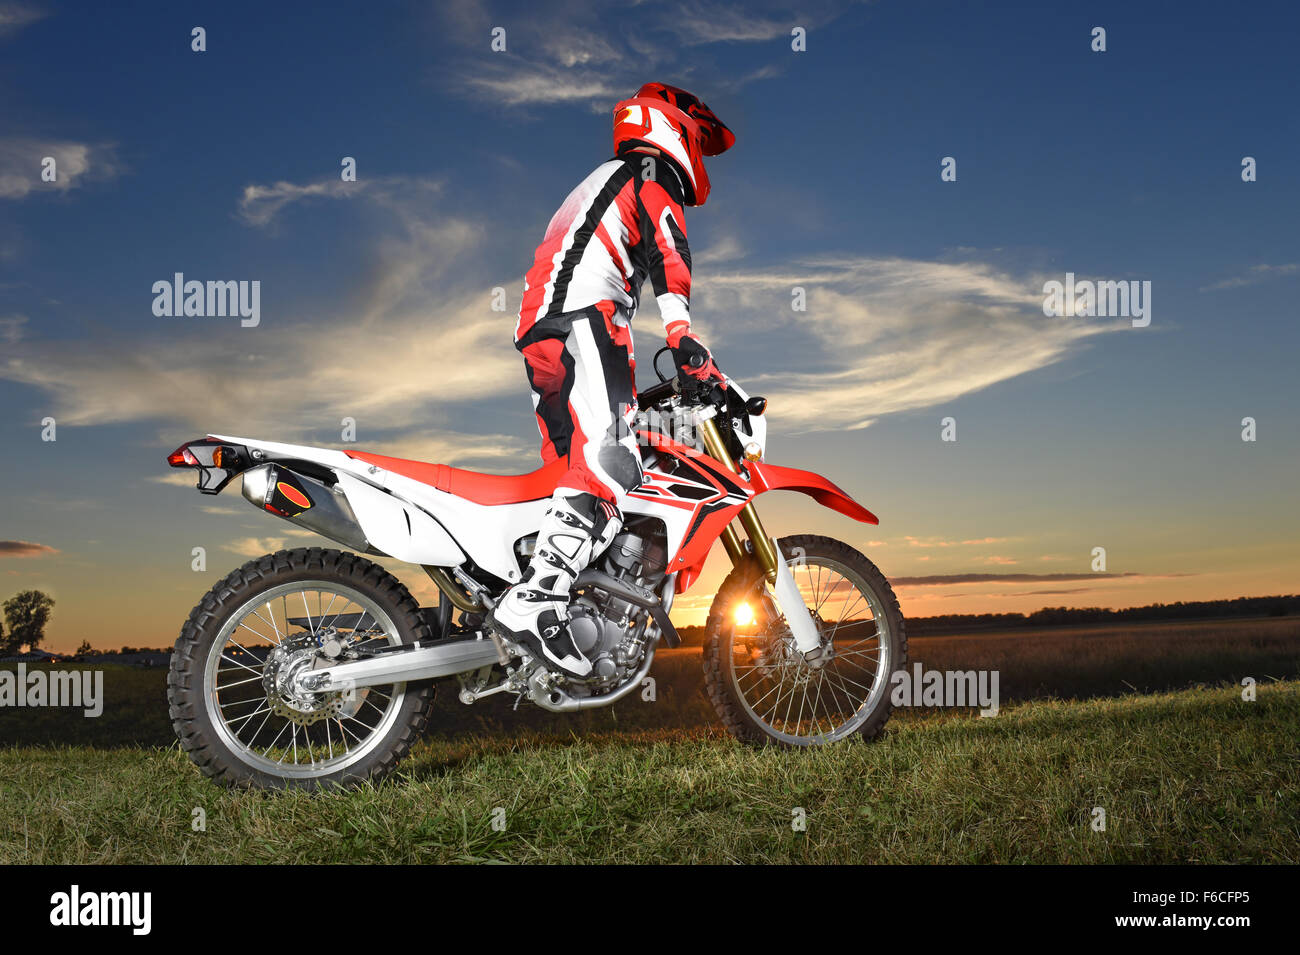 Motocross rider standing on motorcycle during sunset Stock Photo